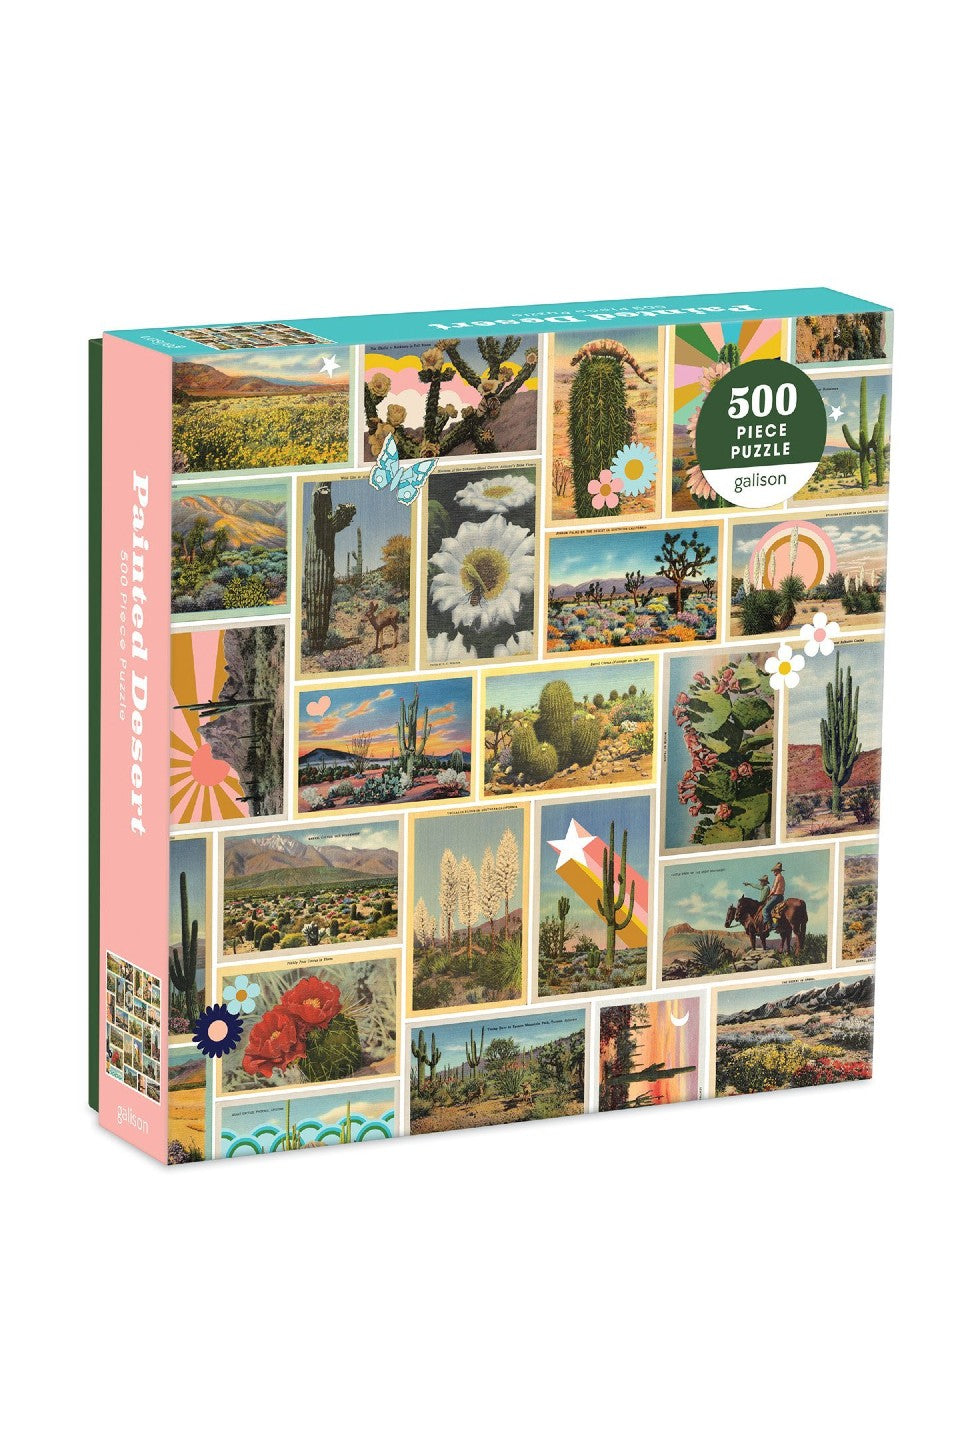 Chronicle - Painted Desert 500pc Puzzle